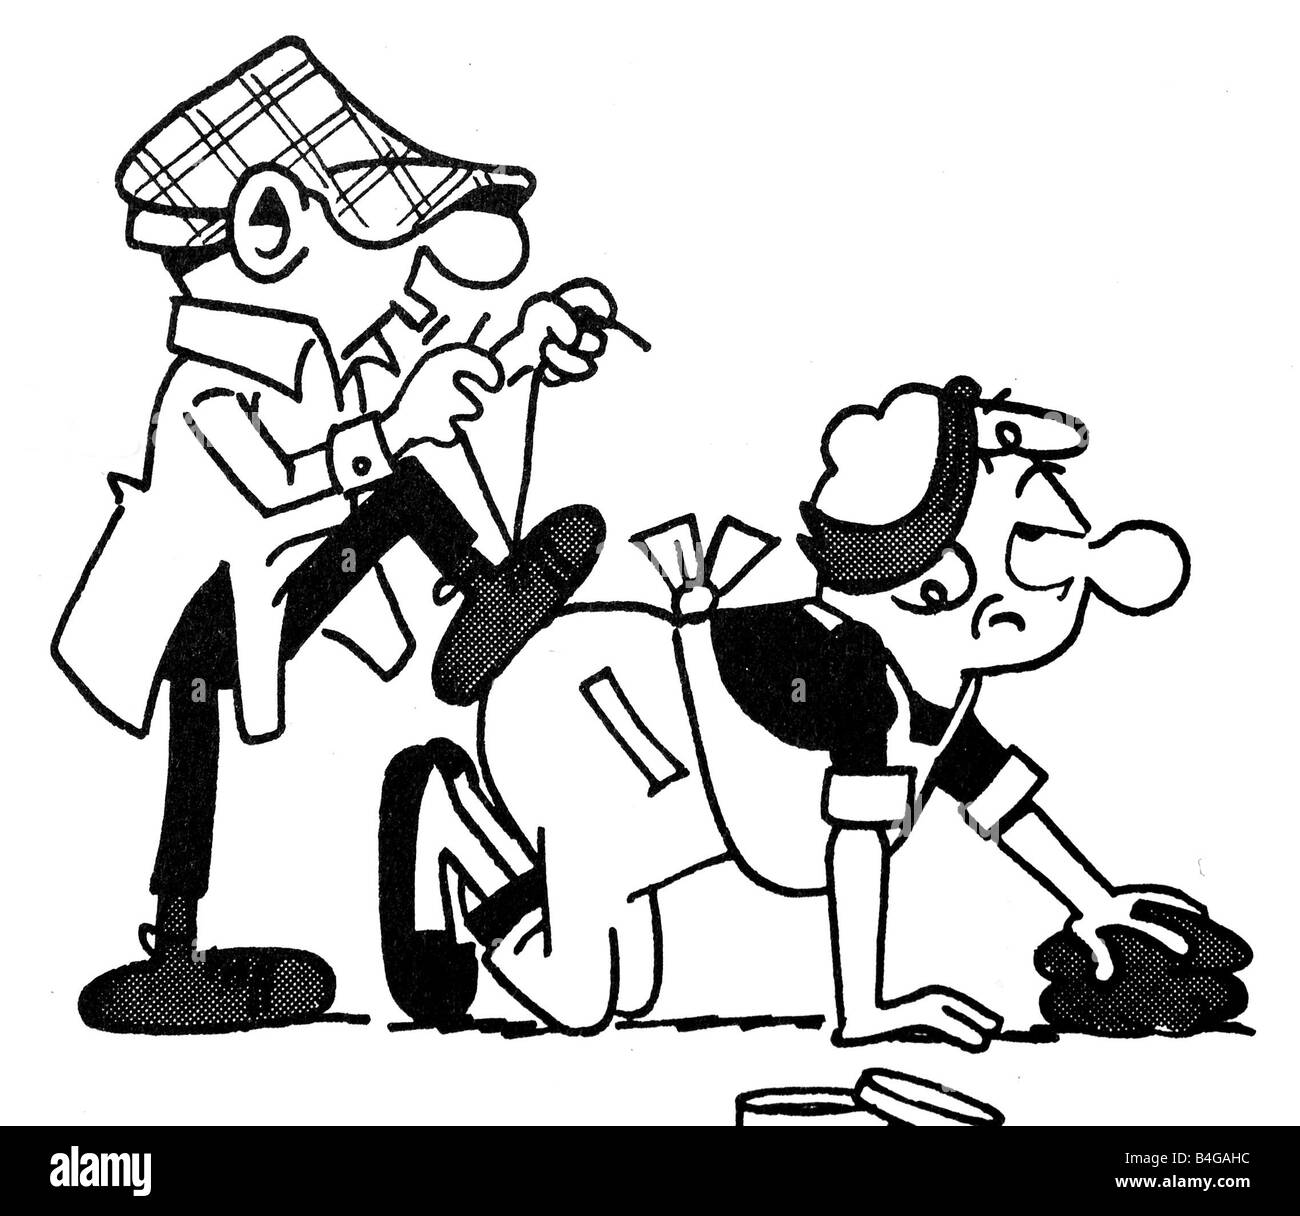 Andy Capp Was Created By Reg Smythe And Is One Of The Most Successful Stock Photo Alamy